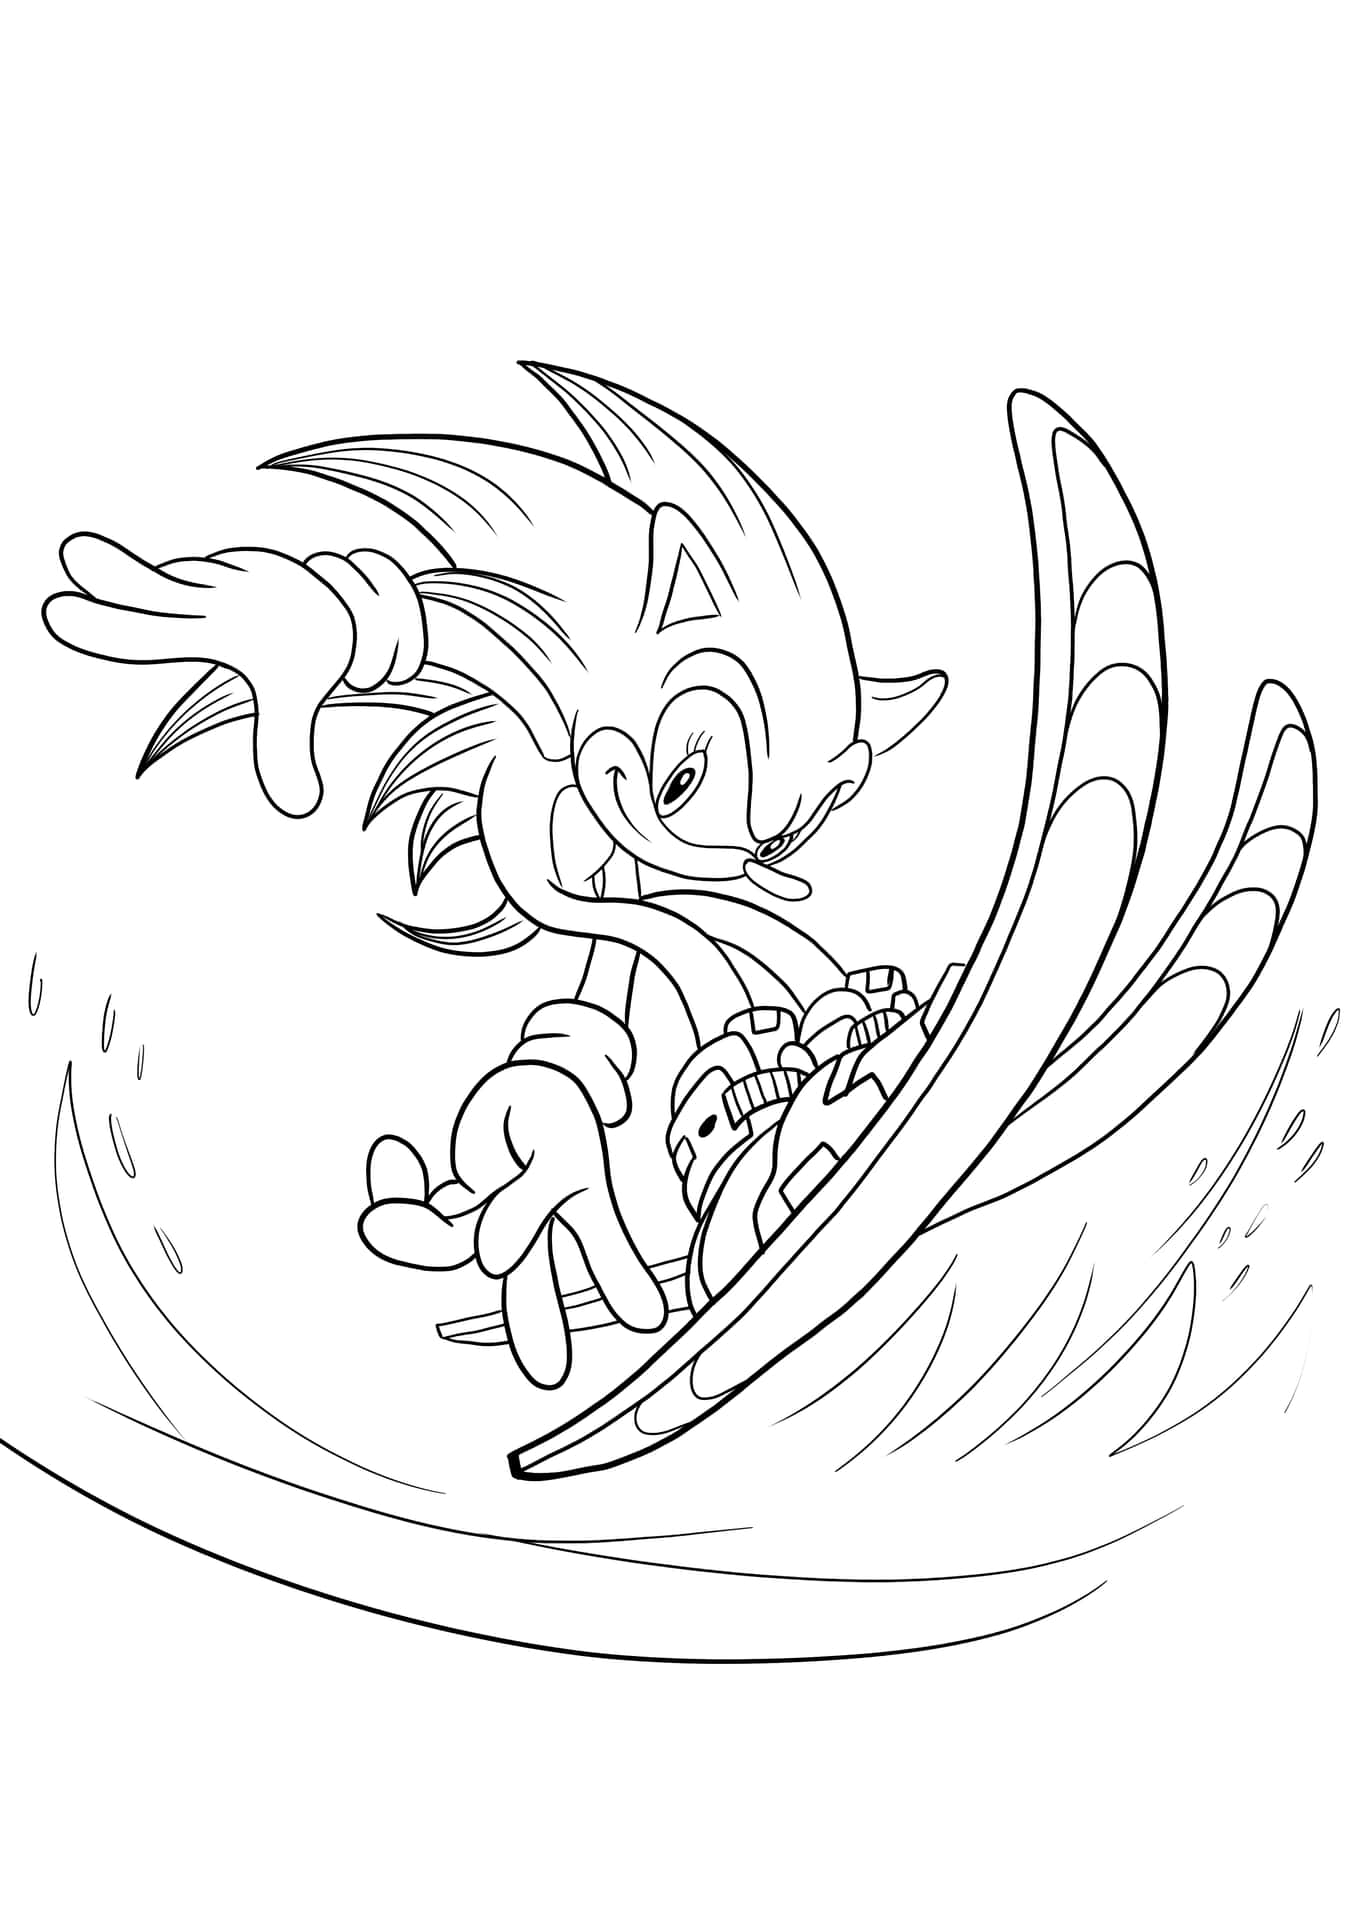 Caption: Vibrantly Colored Sonic the Hedgehog Illustration